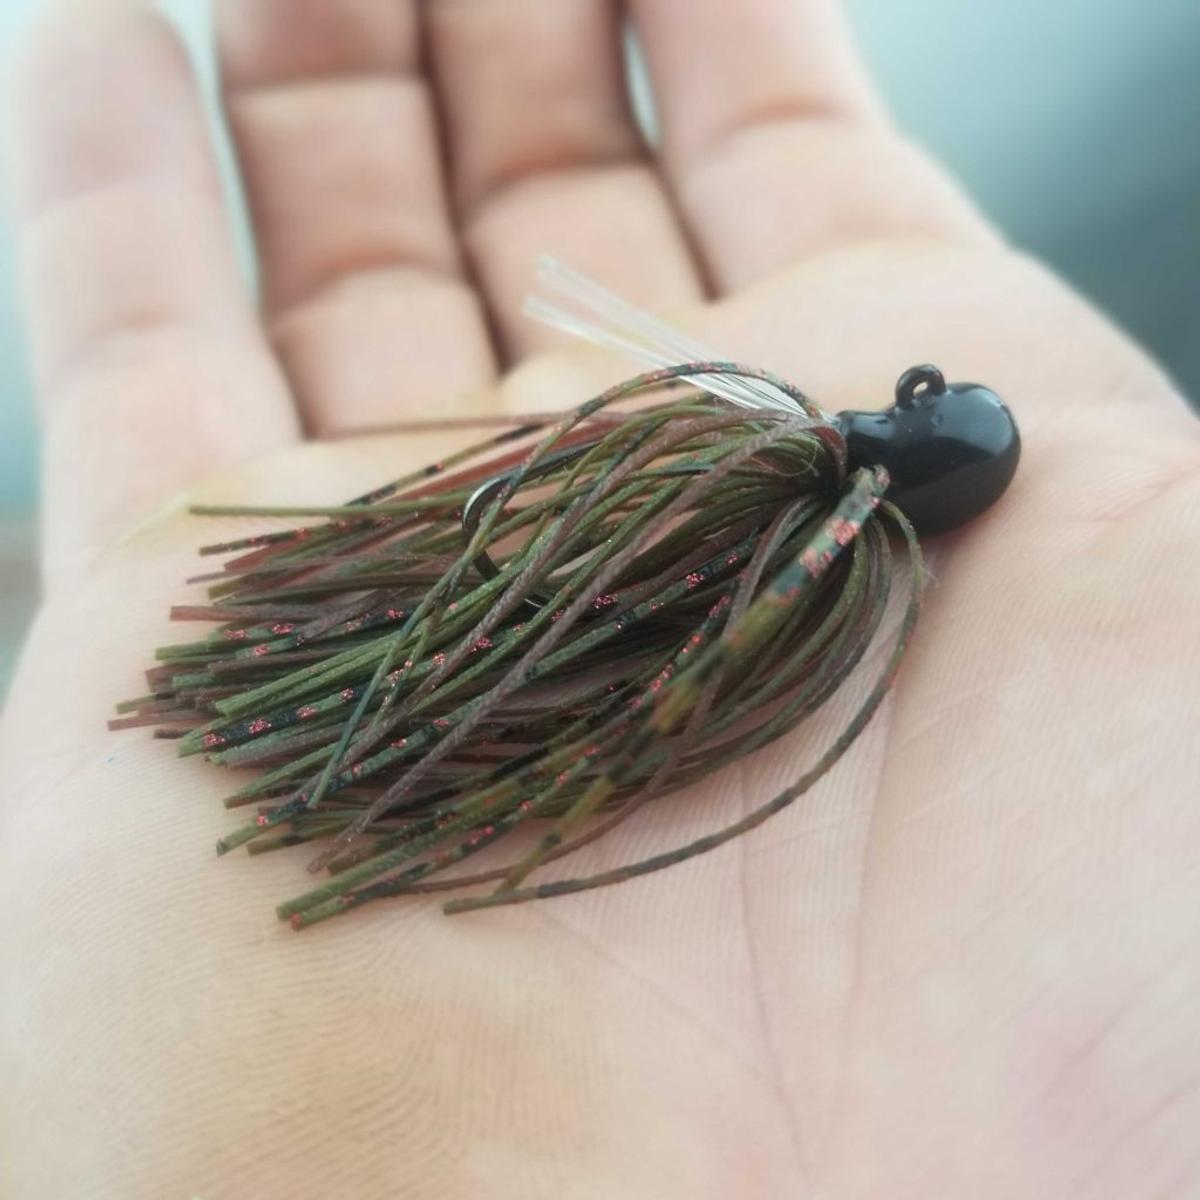 5 Favorite Lures for Spring Bass Fishing - Realtree Camo